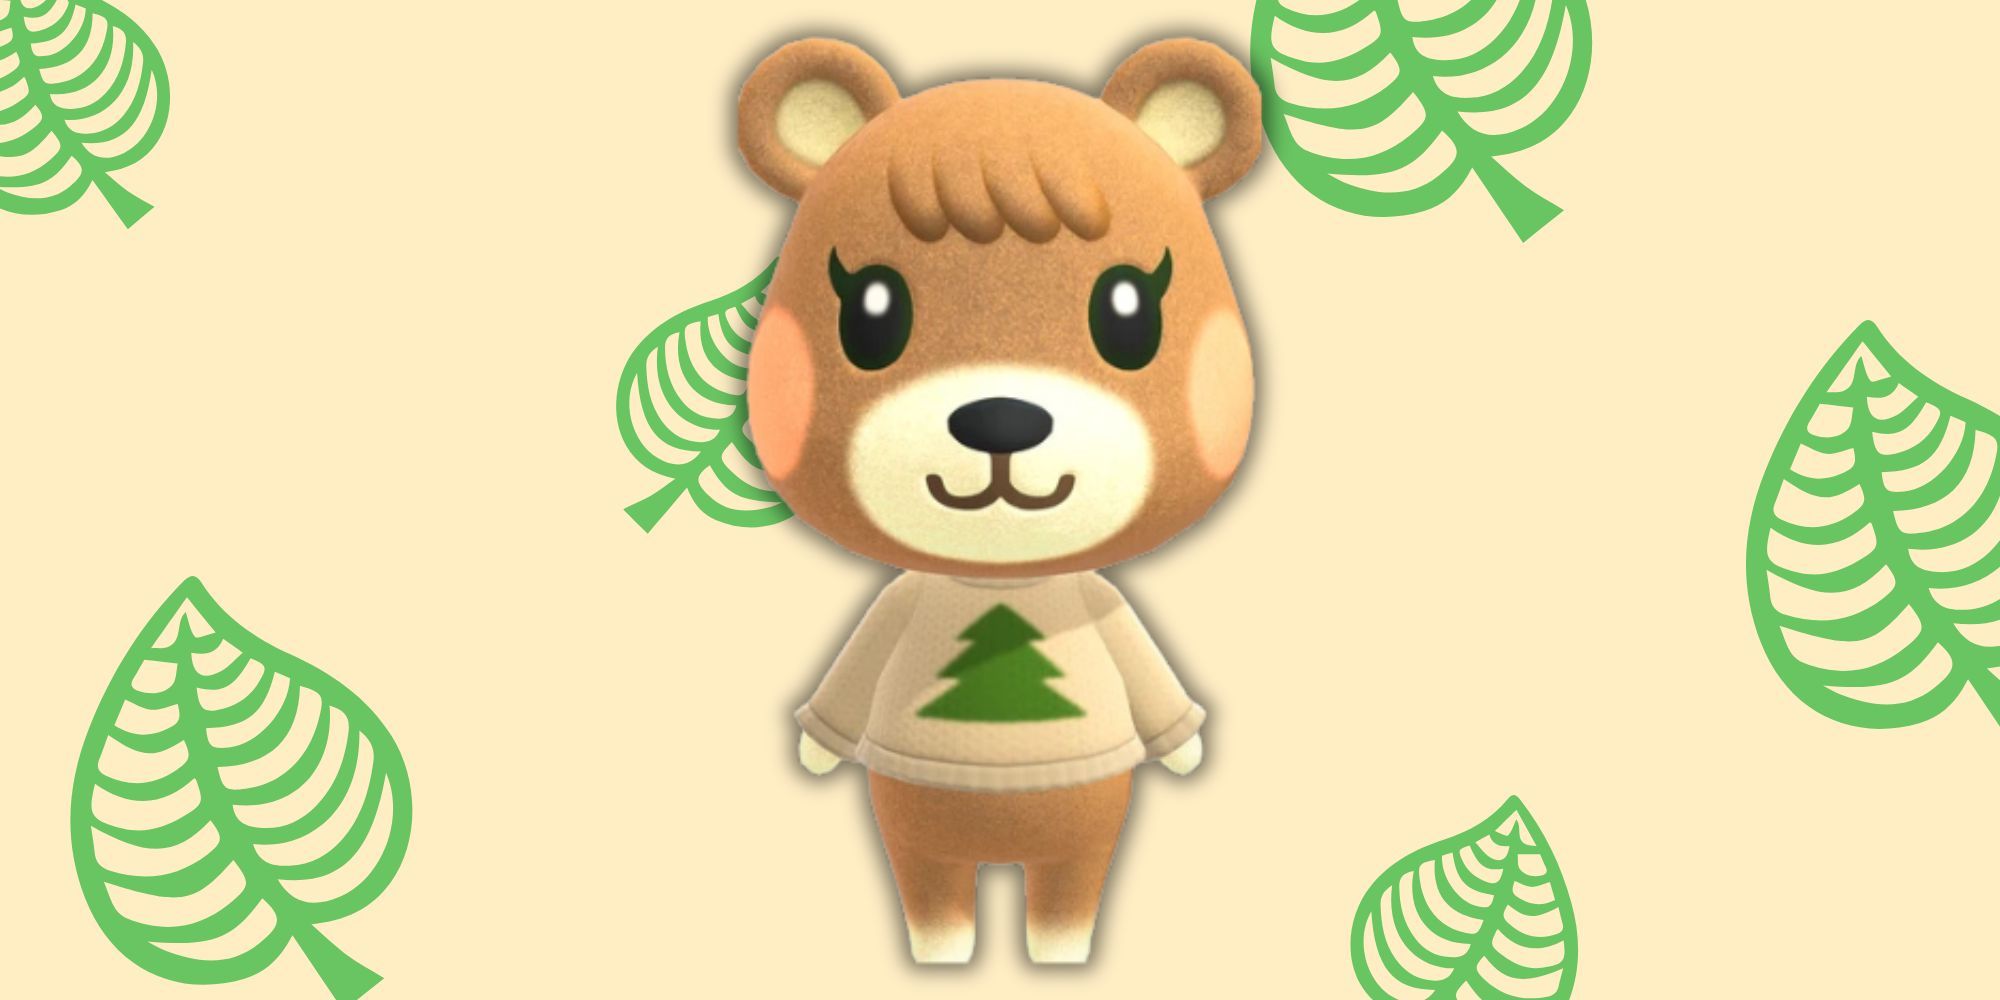 Maple from Animal Crossing in front of leaf-patterned backdrop